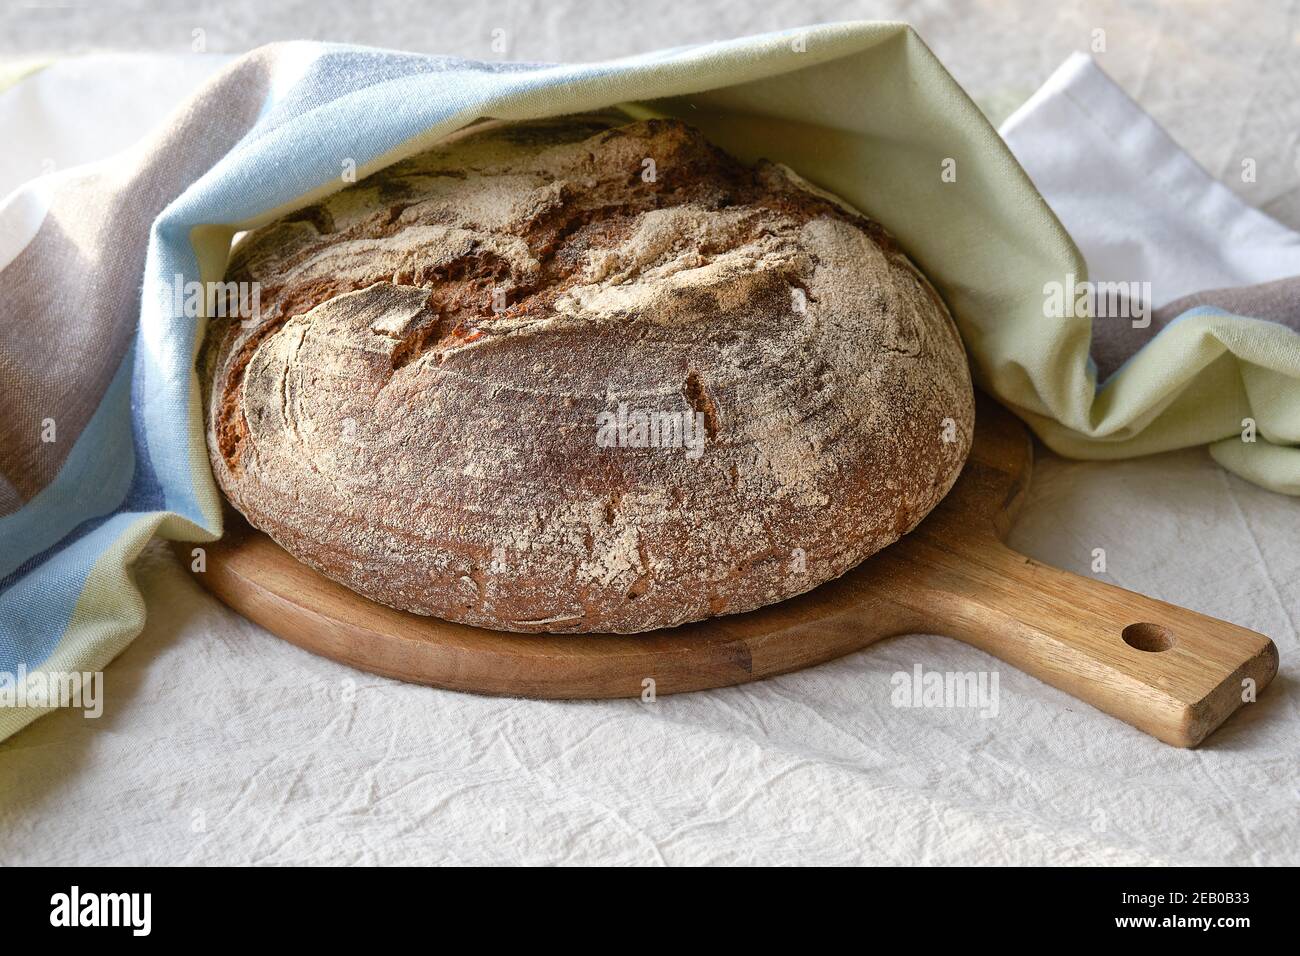 No knead handmade loaf on cutting board. German Bauernbrot means Farmers Bread in English. Wholemeal rye wheat bread baked in ceramic pan at home. Stock Photo